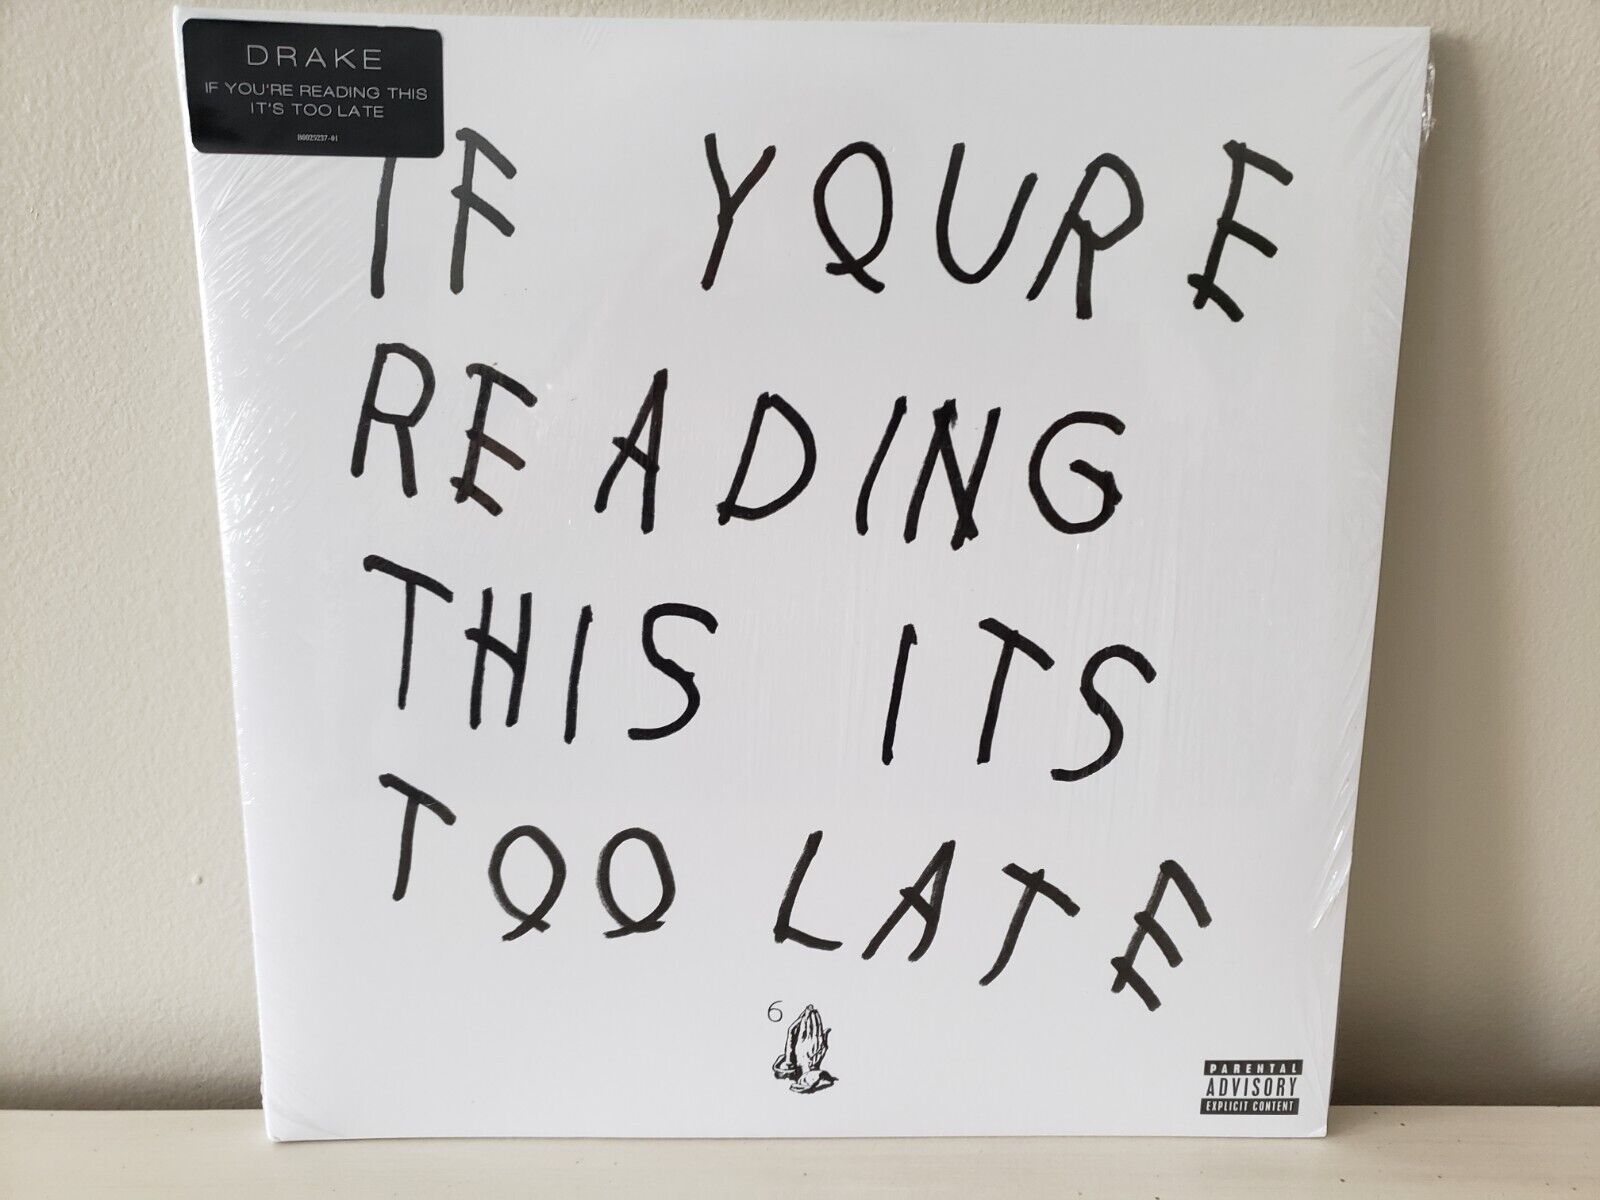 If You're Reading This It's Too Late by Drake (Record, 2016) online